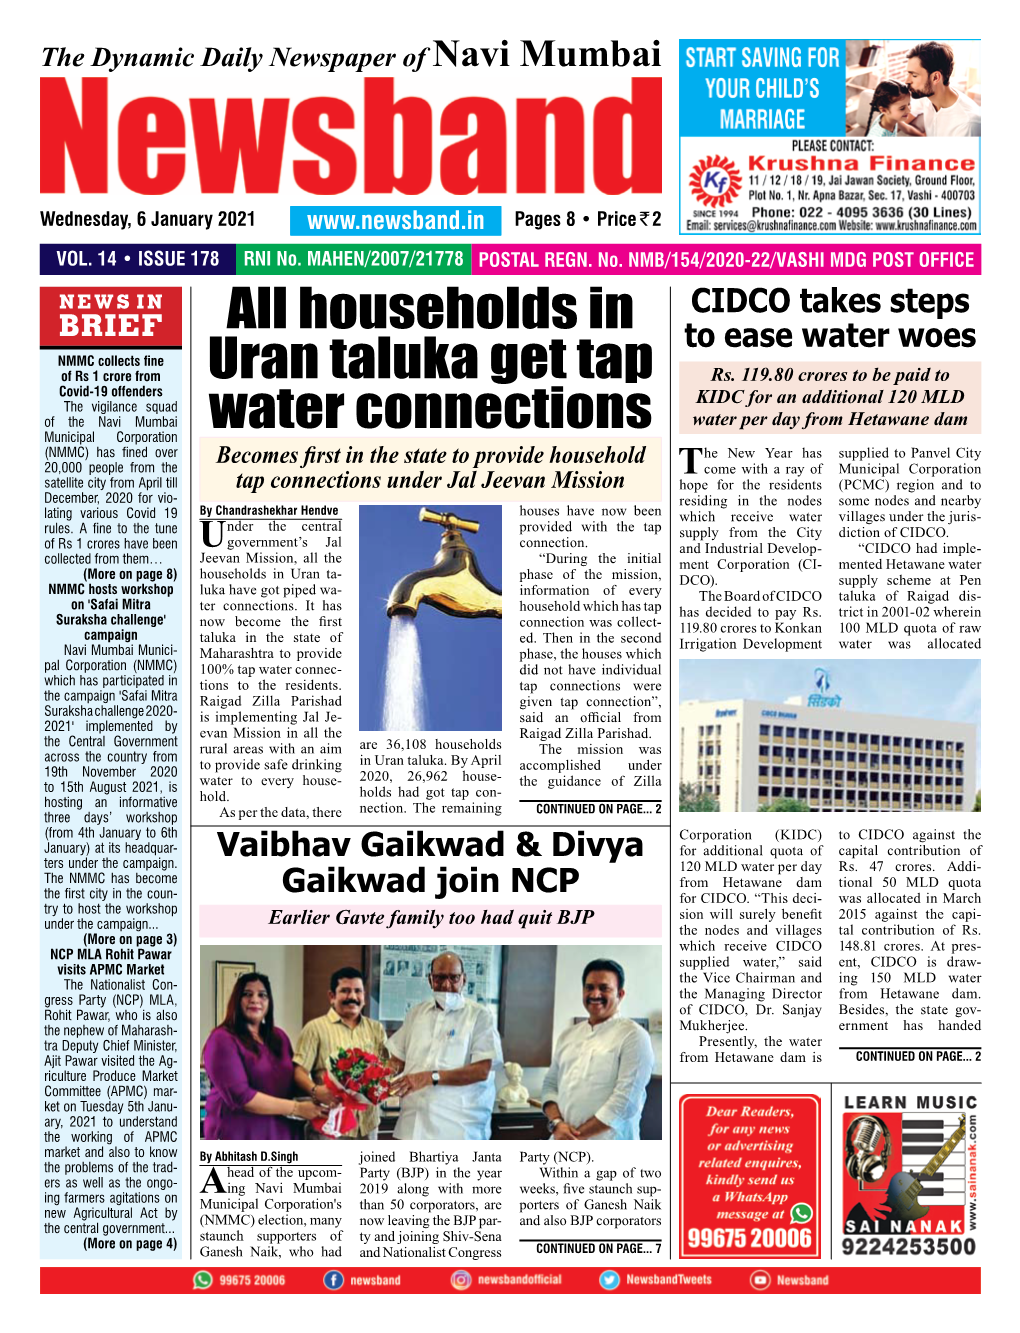 Households in Uran Taluka Get Tap Water Connections